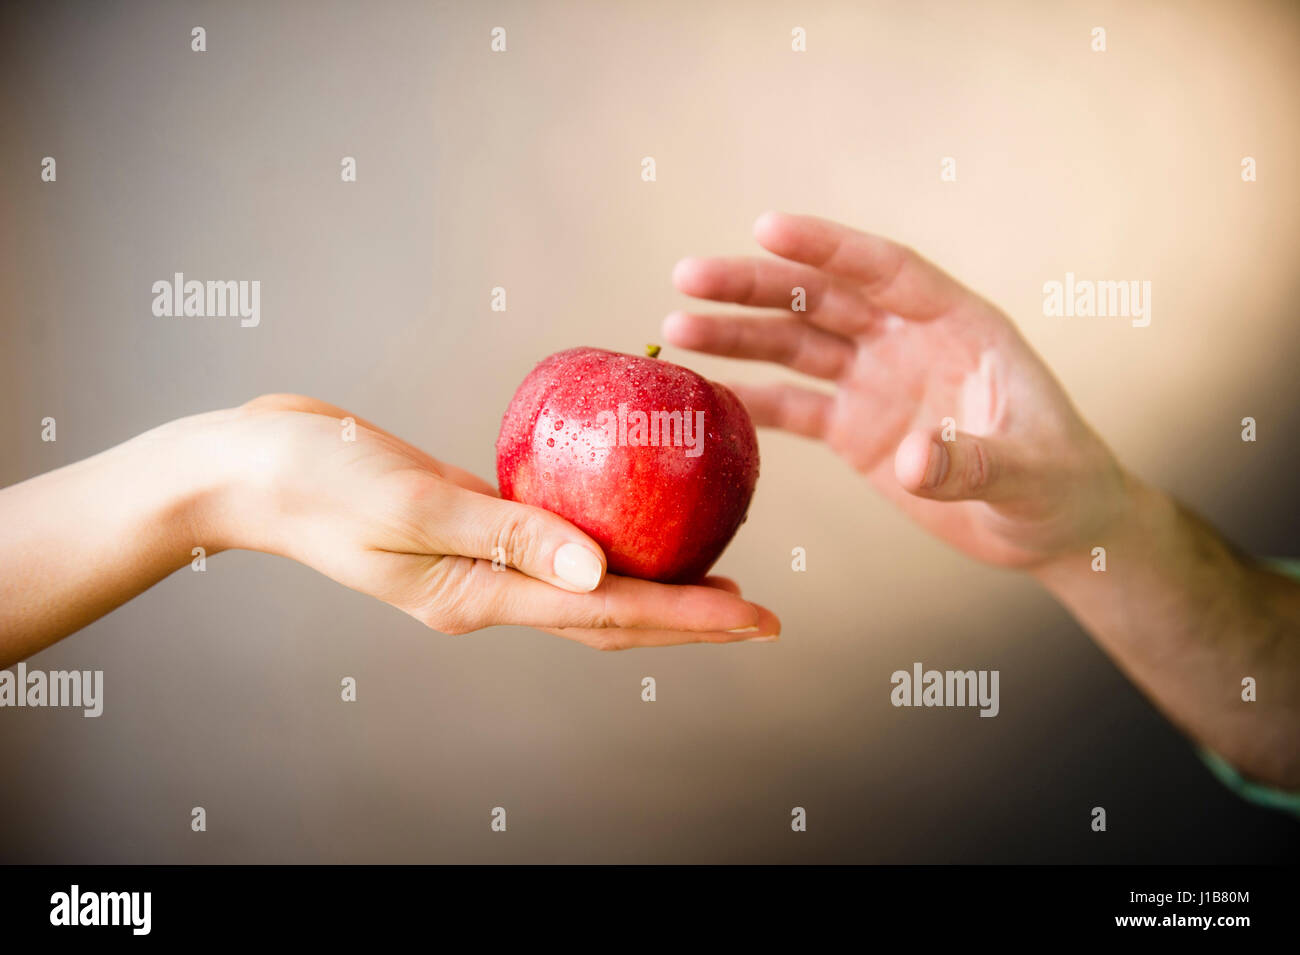 Hand of woman offering red apple to man Stock Photo